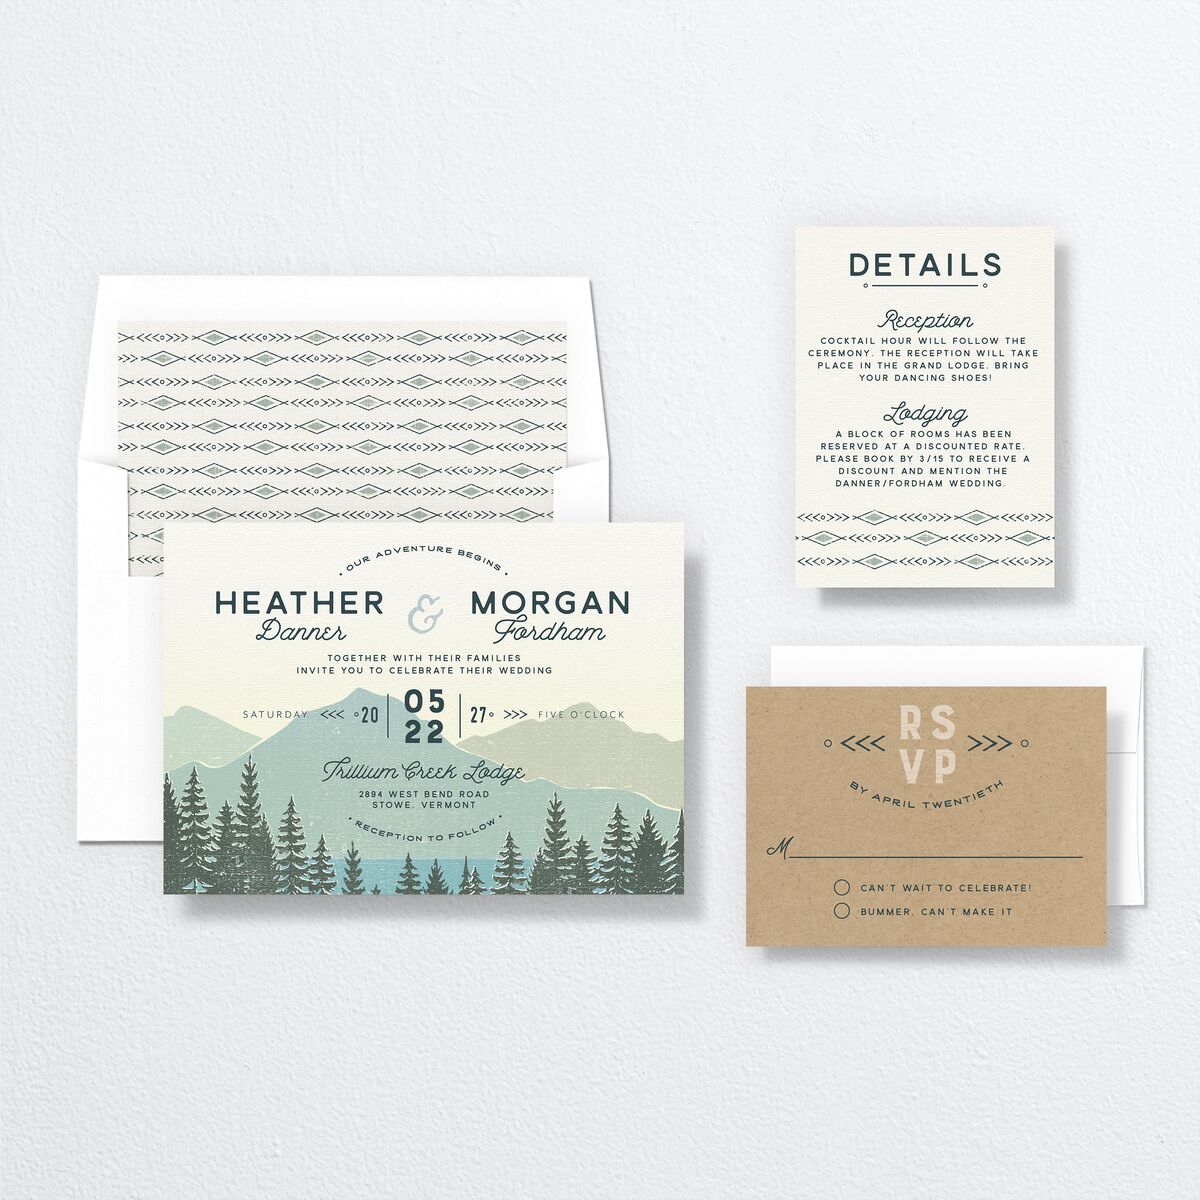 Vintage Mountain Wedding Invitations suite in Teal